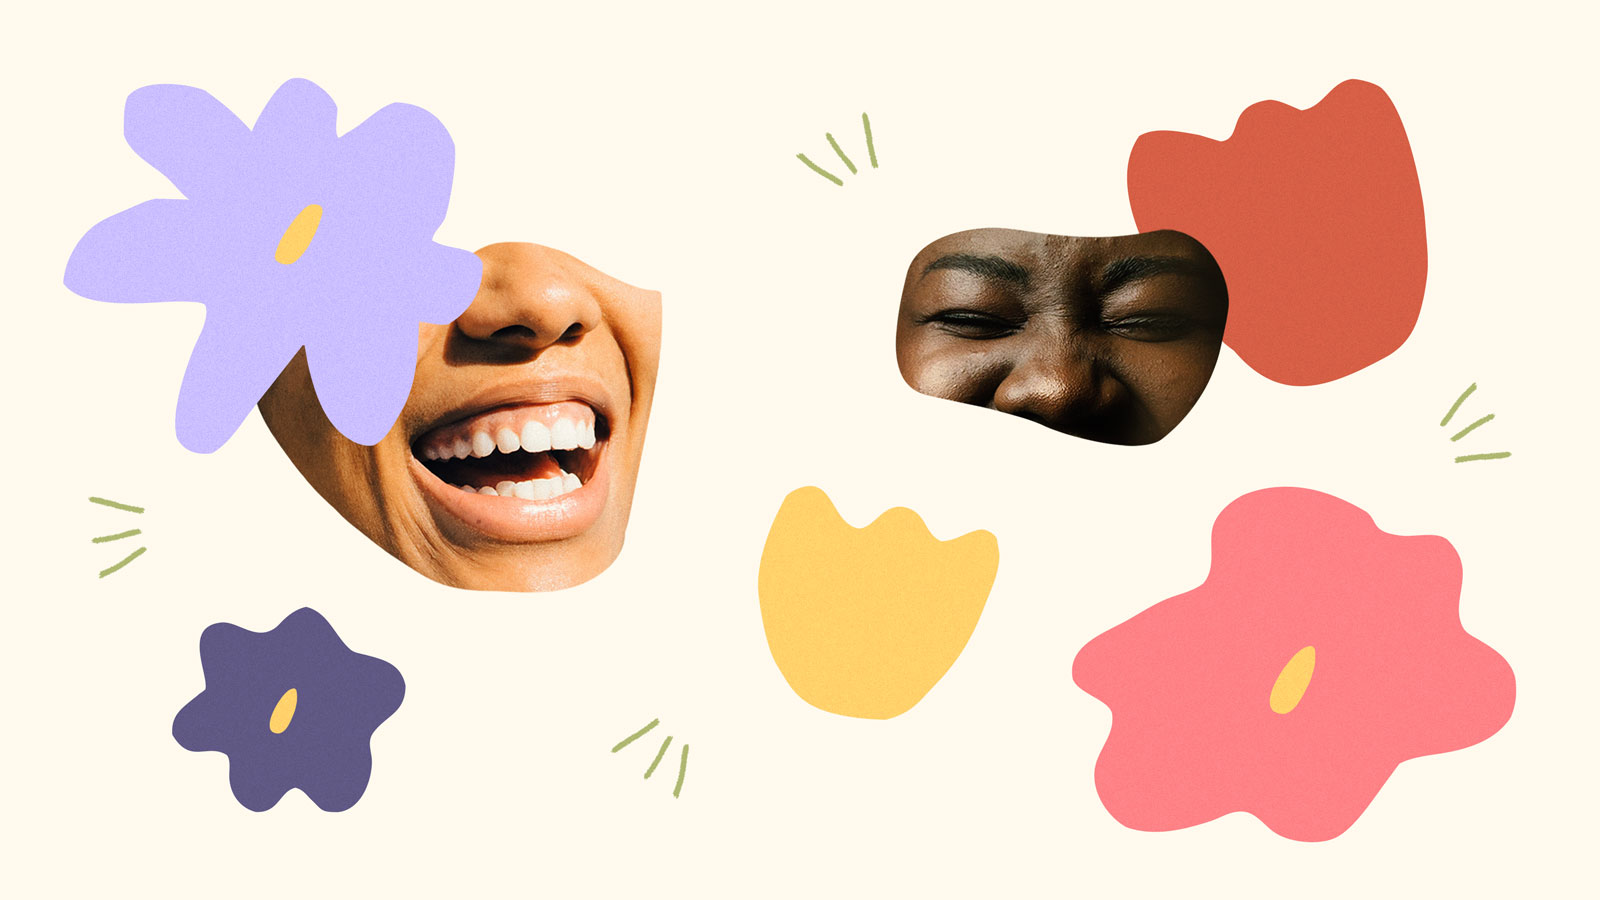 Collage of smiling faces surrounded by hand-drawn flowers